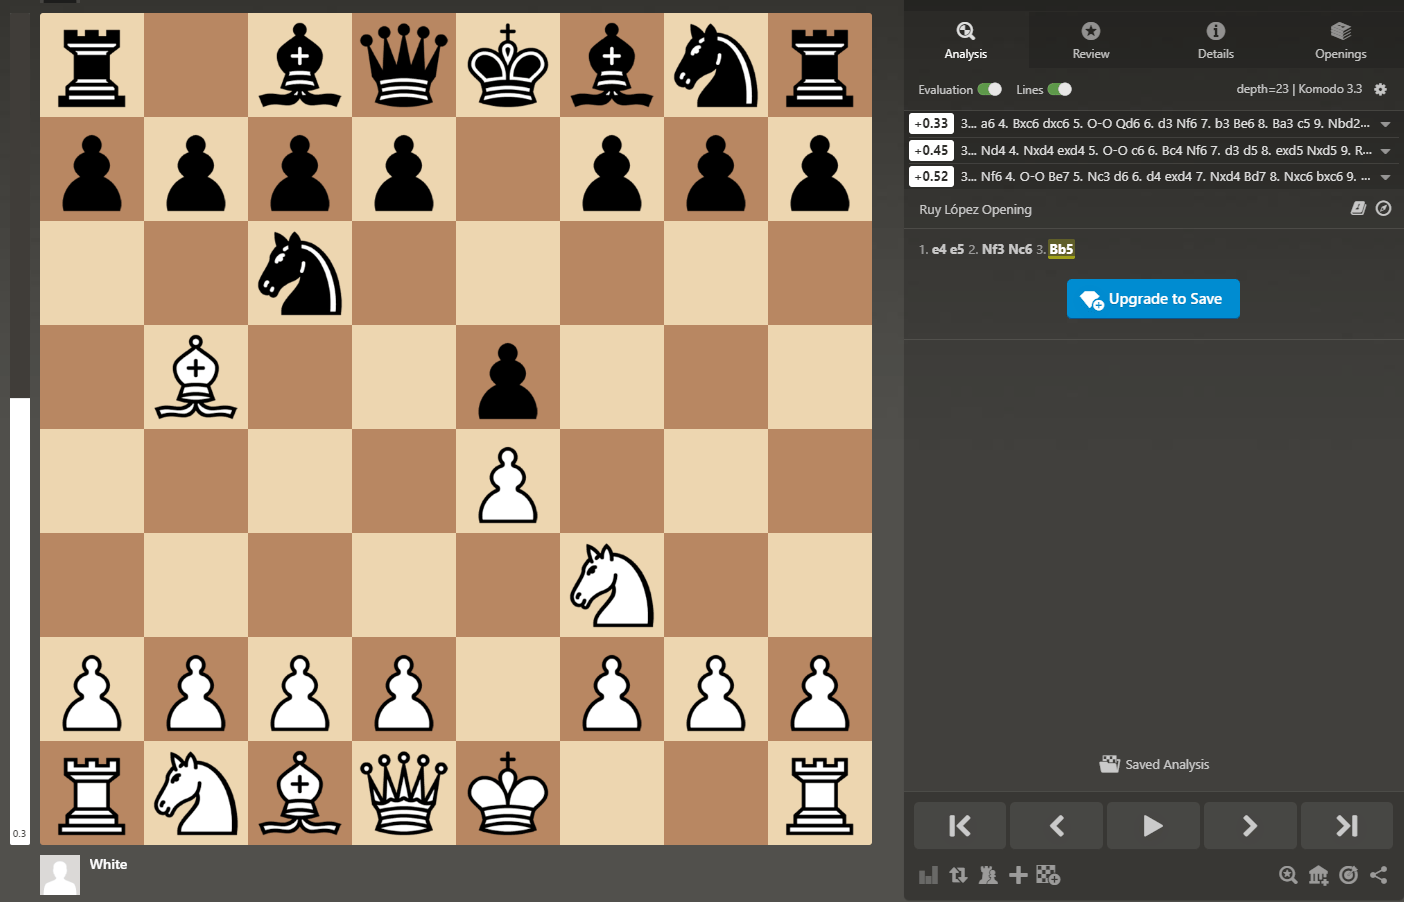 What software or app can I use to demonstrate chess moves without